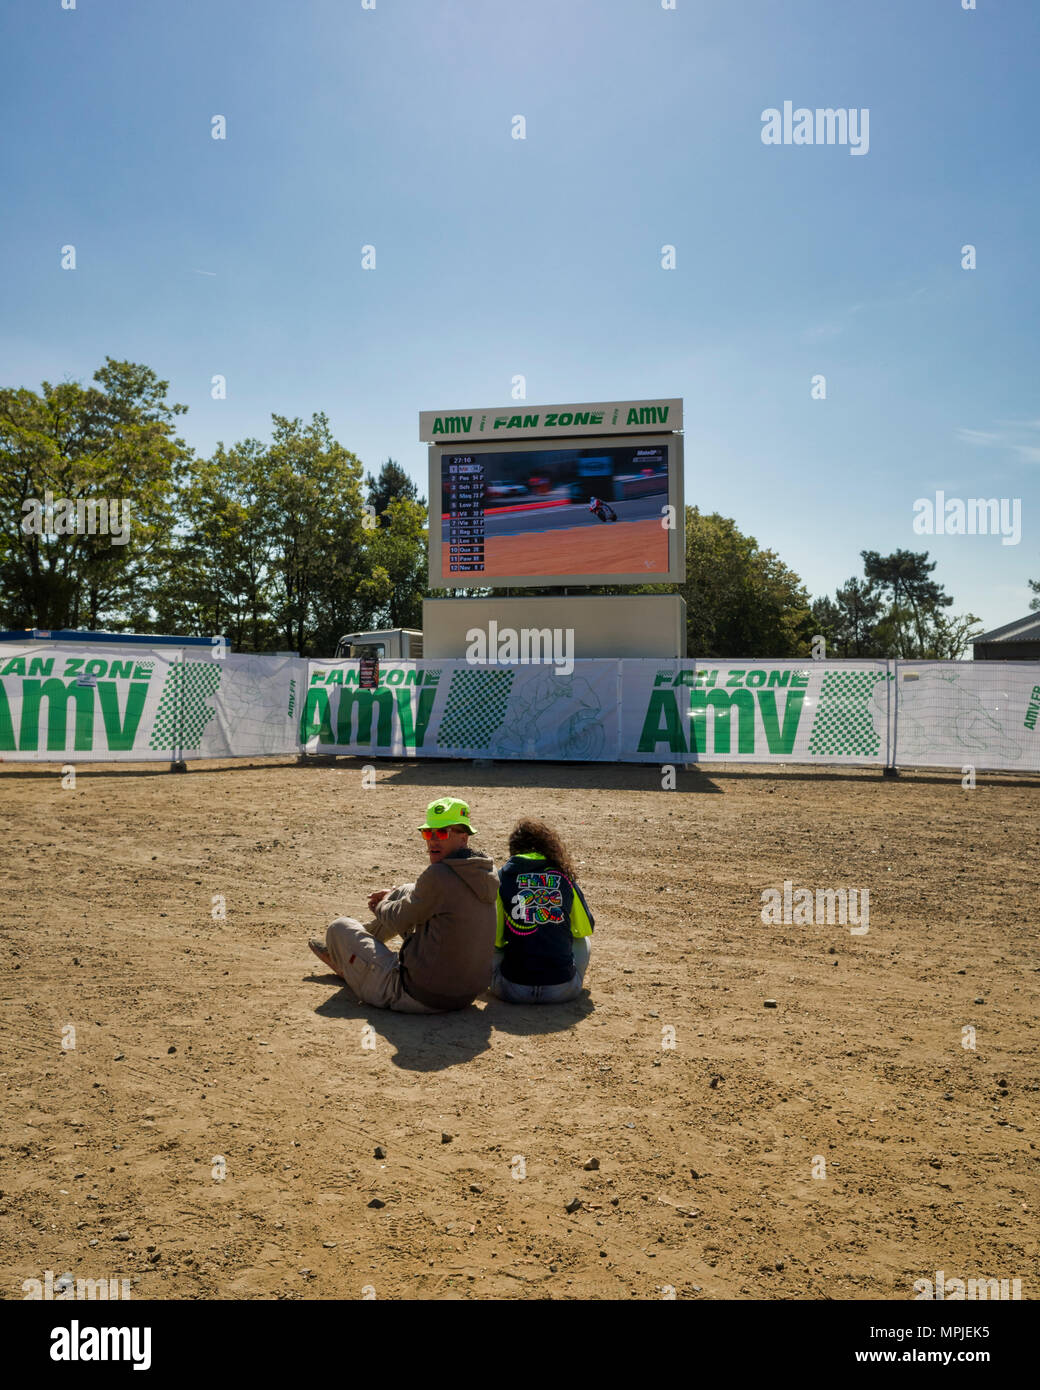 19-20th May 2018. Le Mans, France.  Behind the scenes at the MotoGP.  A young couple sit on the dirt ground to watch the practice sessions on one of the big screens. Stock Photo